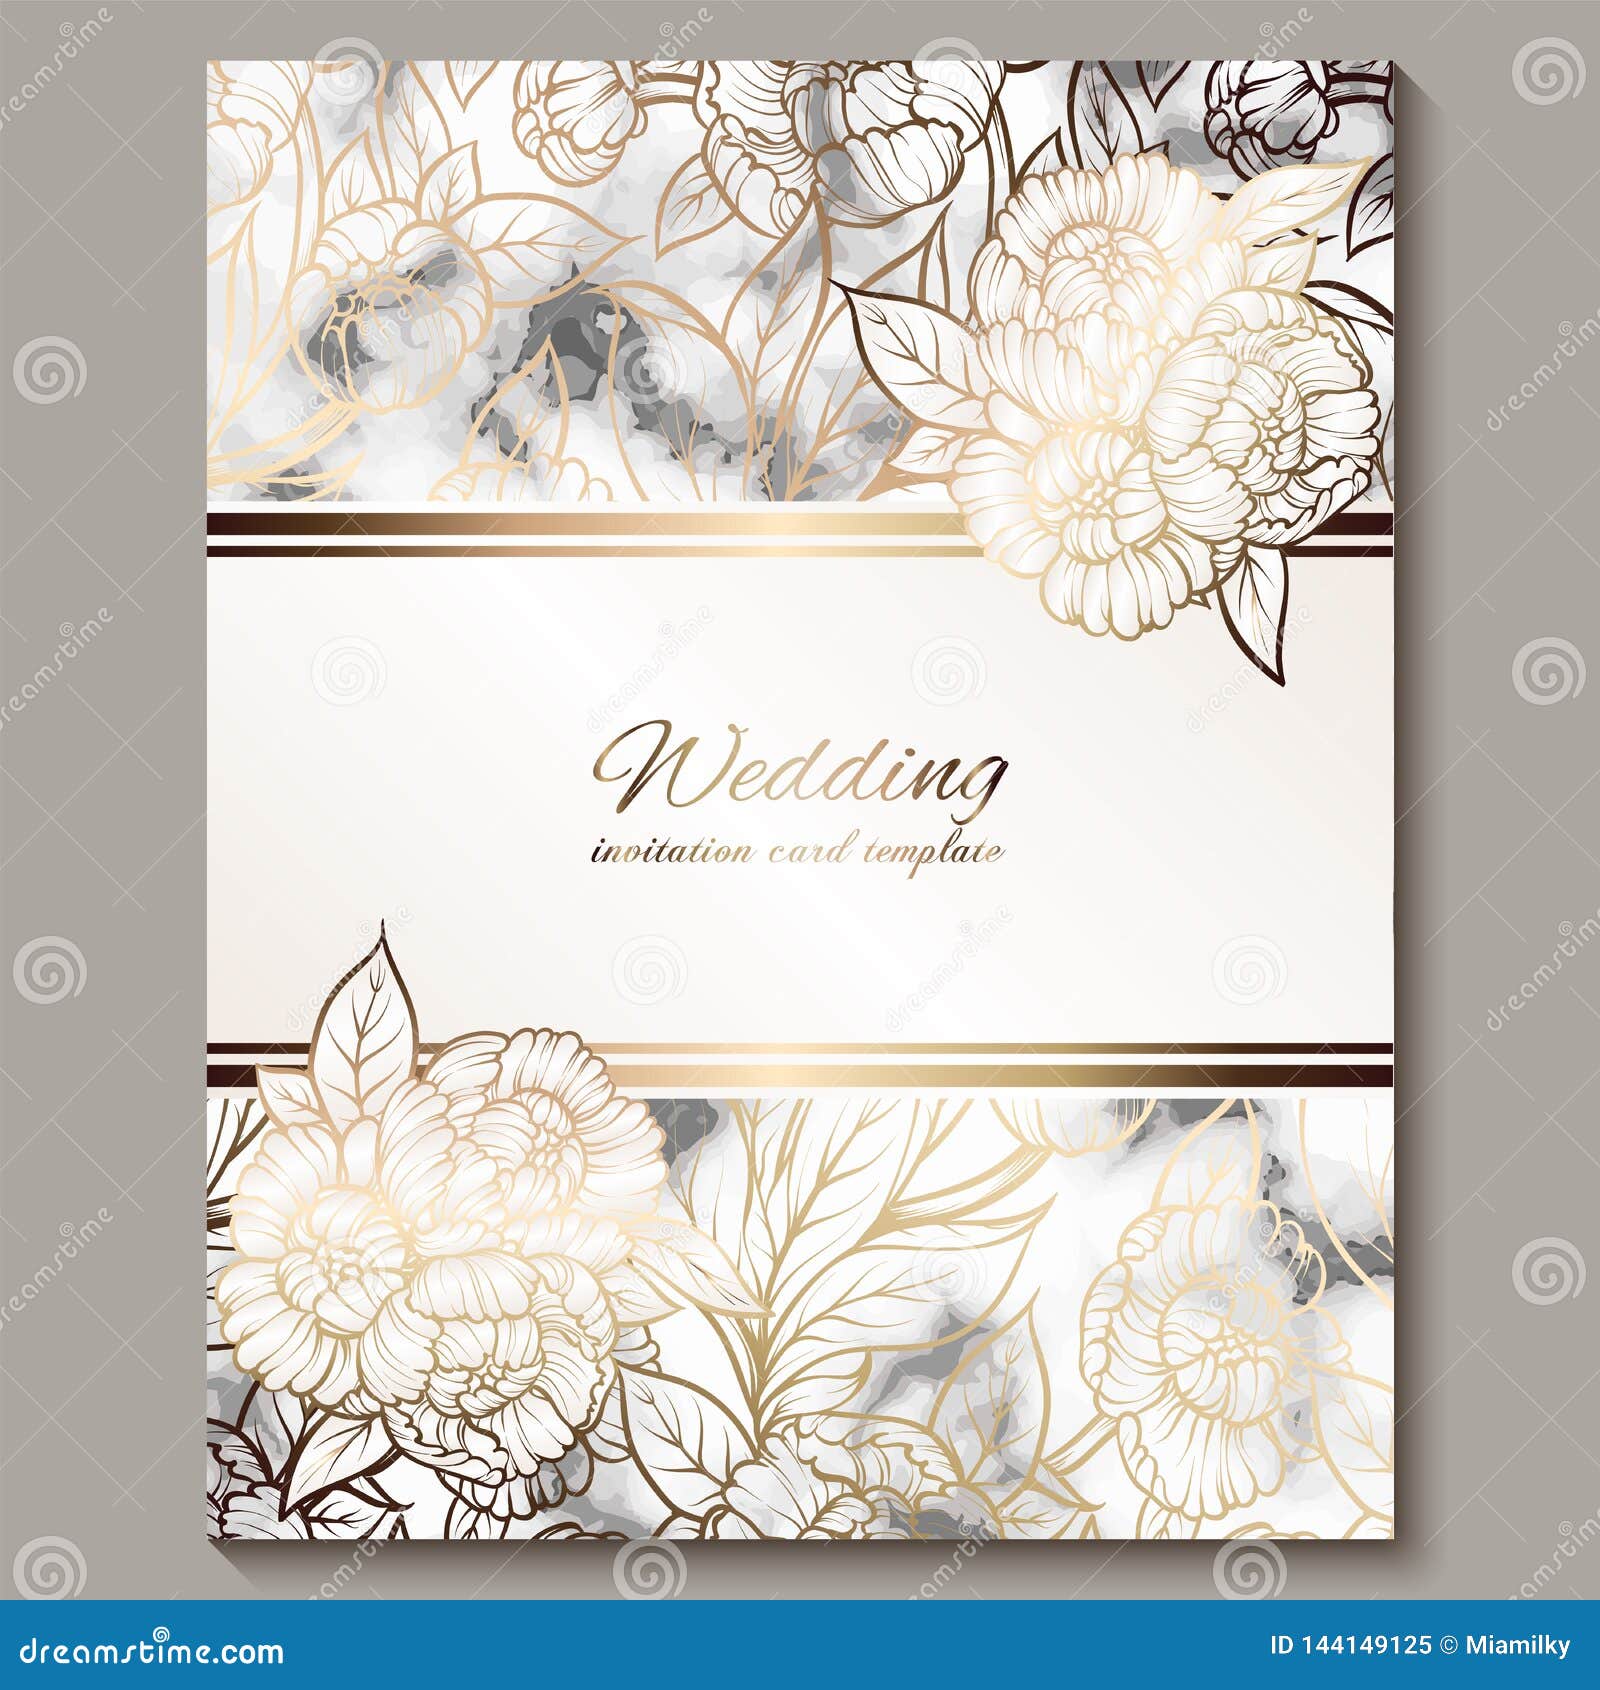 Luxury and Elegant Wedding Invitation Cards with Marble Texture and Gold  Glitter Background. Modern Wedding Invitation Decorated Stock Illustration  - Illustration of marble, white: 144149125